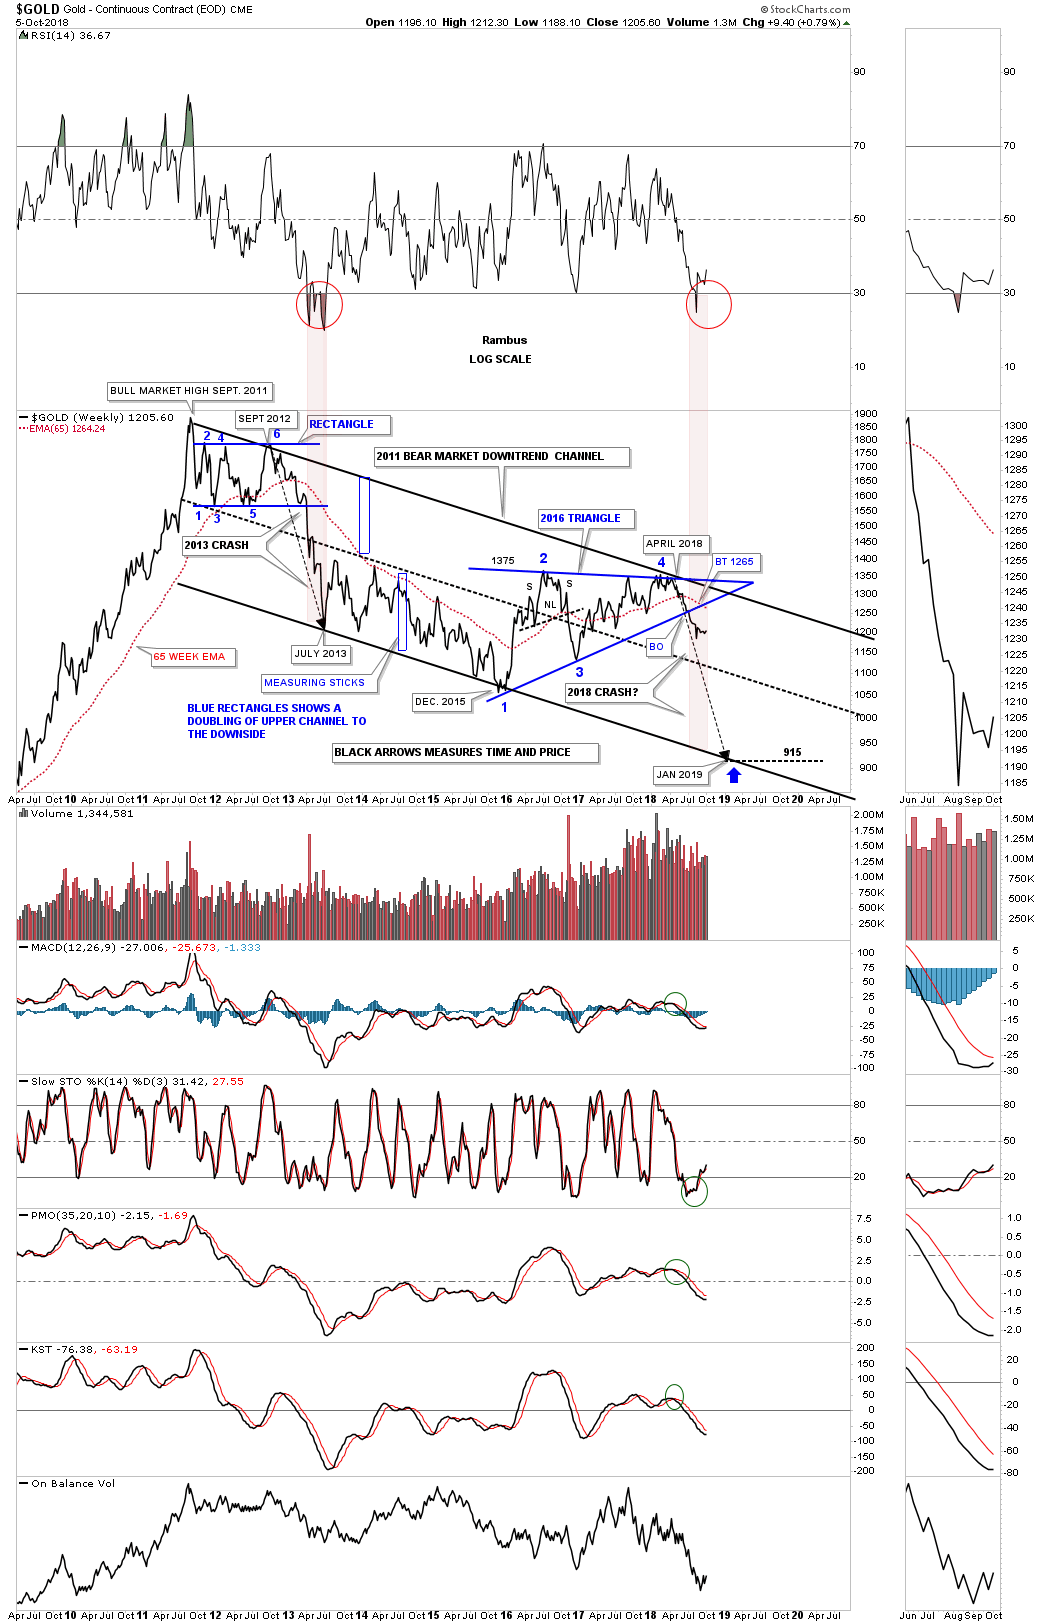 Gold Weekly 2009-2018